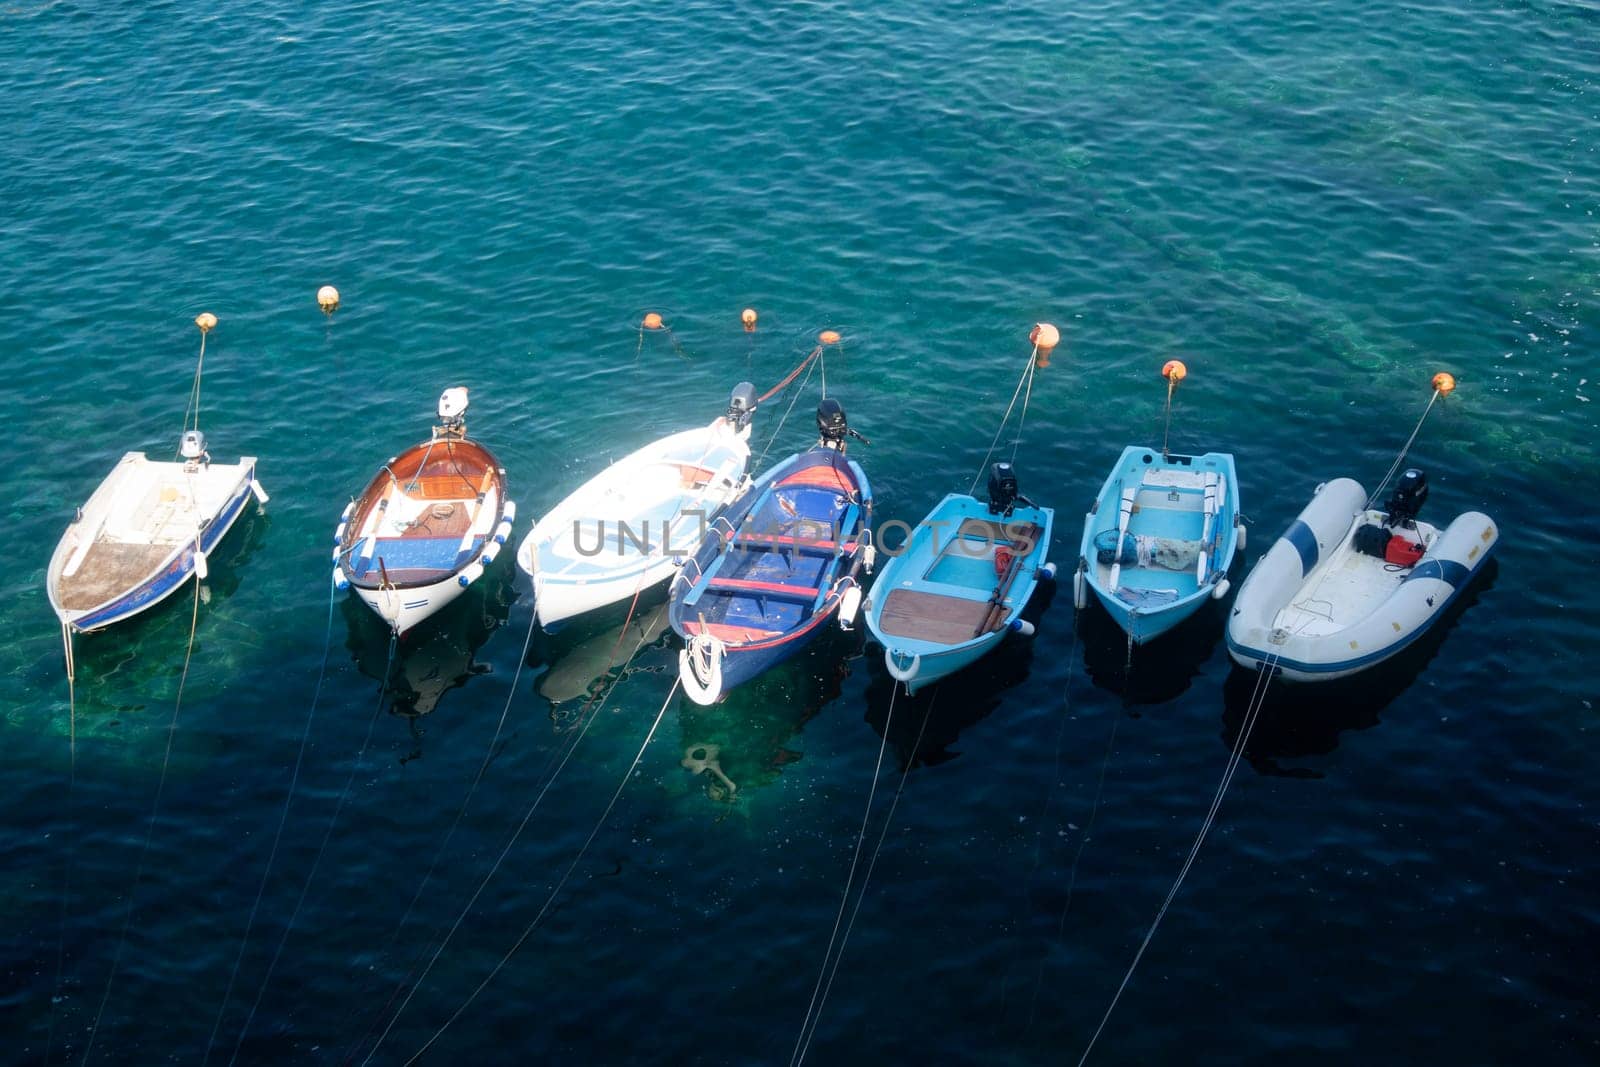 Photographic documentation of small fishing boats moored in port 